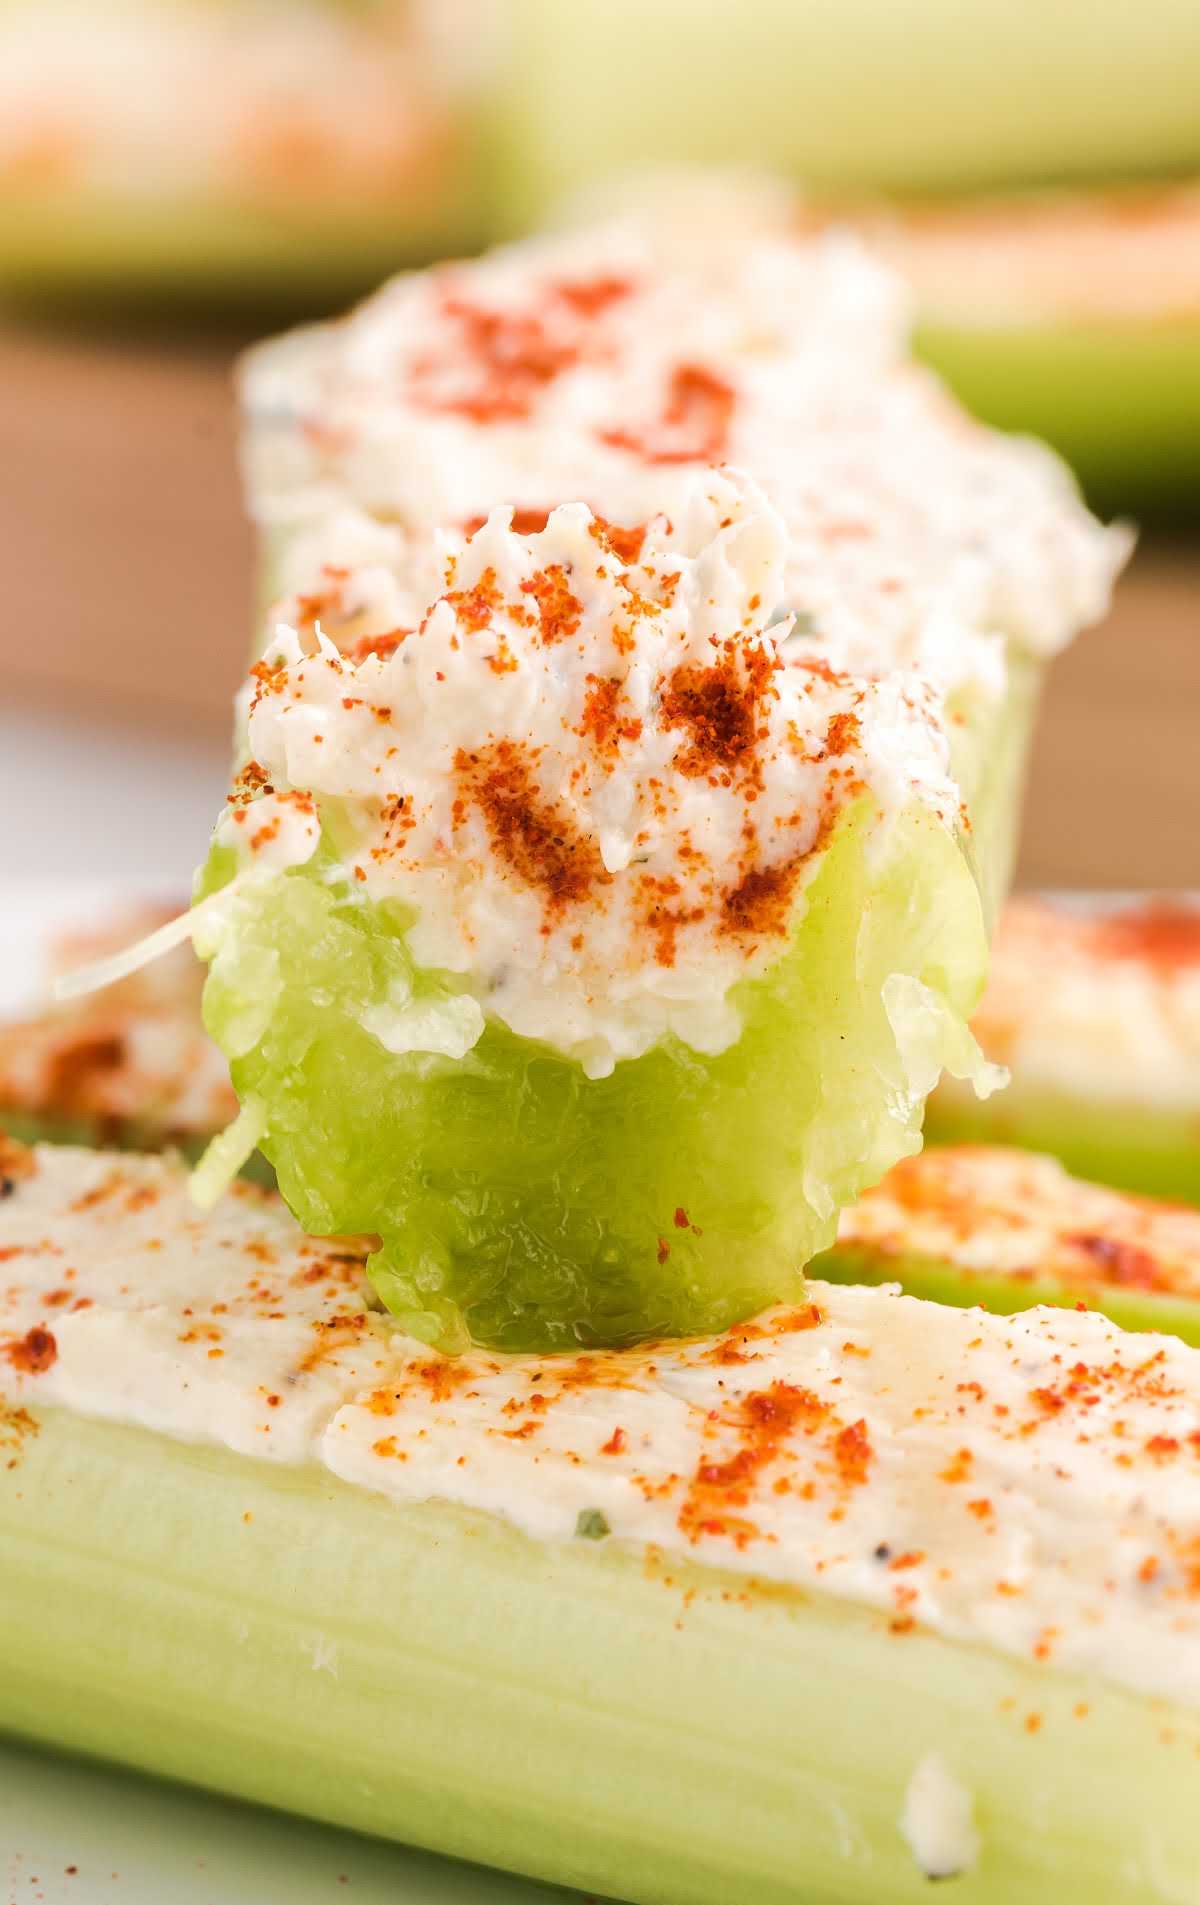 Celery stuffed with a cream cheese filling and topped with smoked paprika